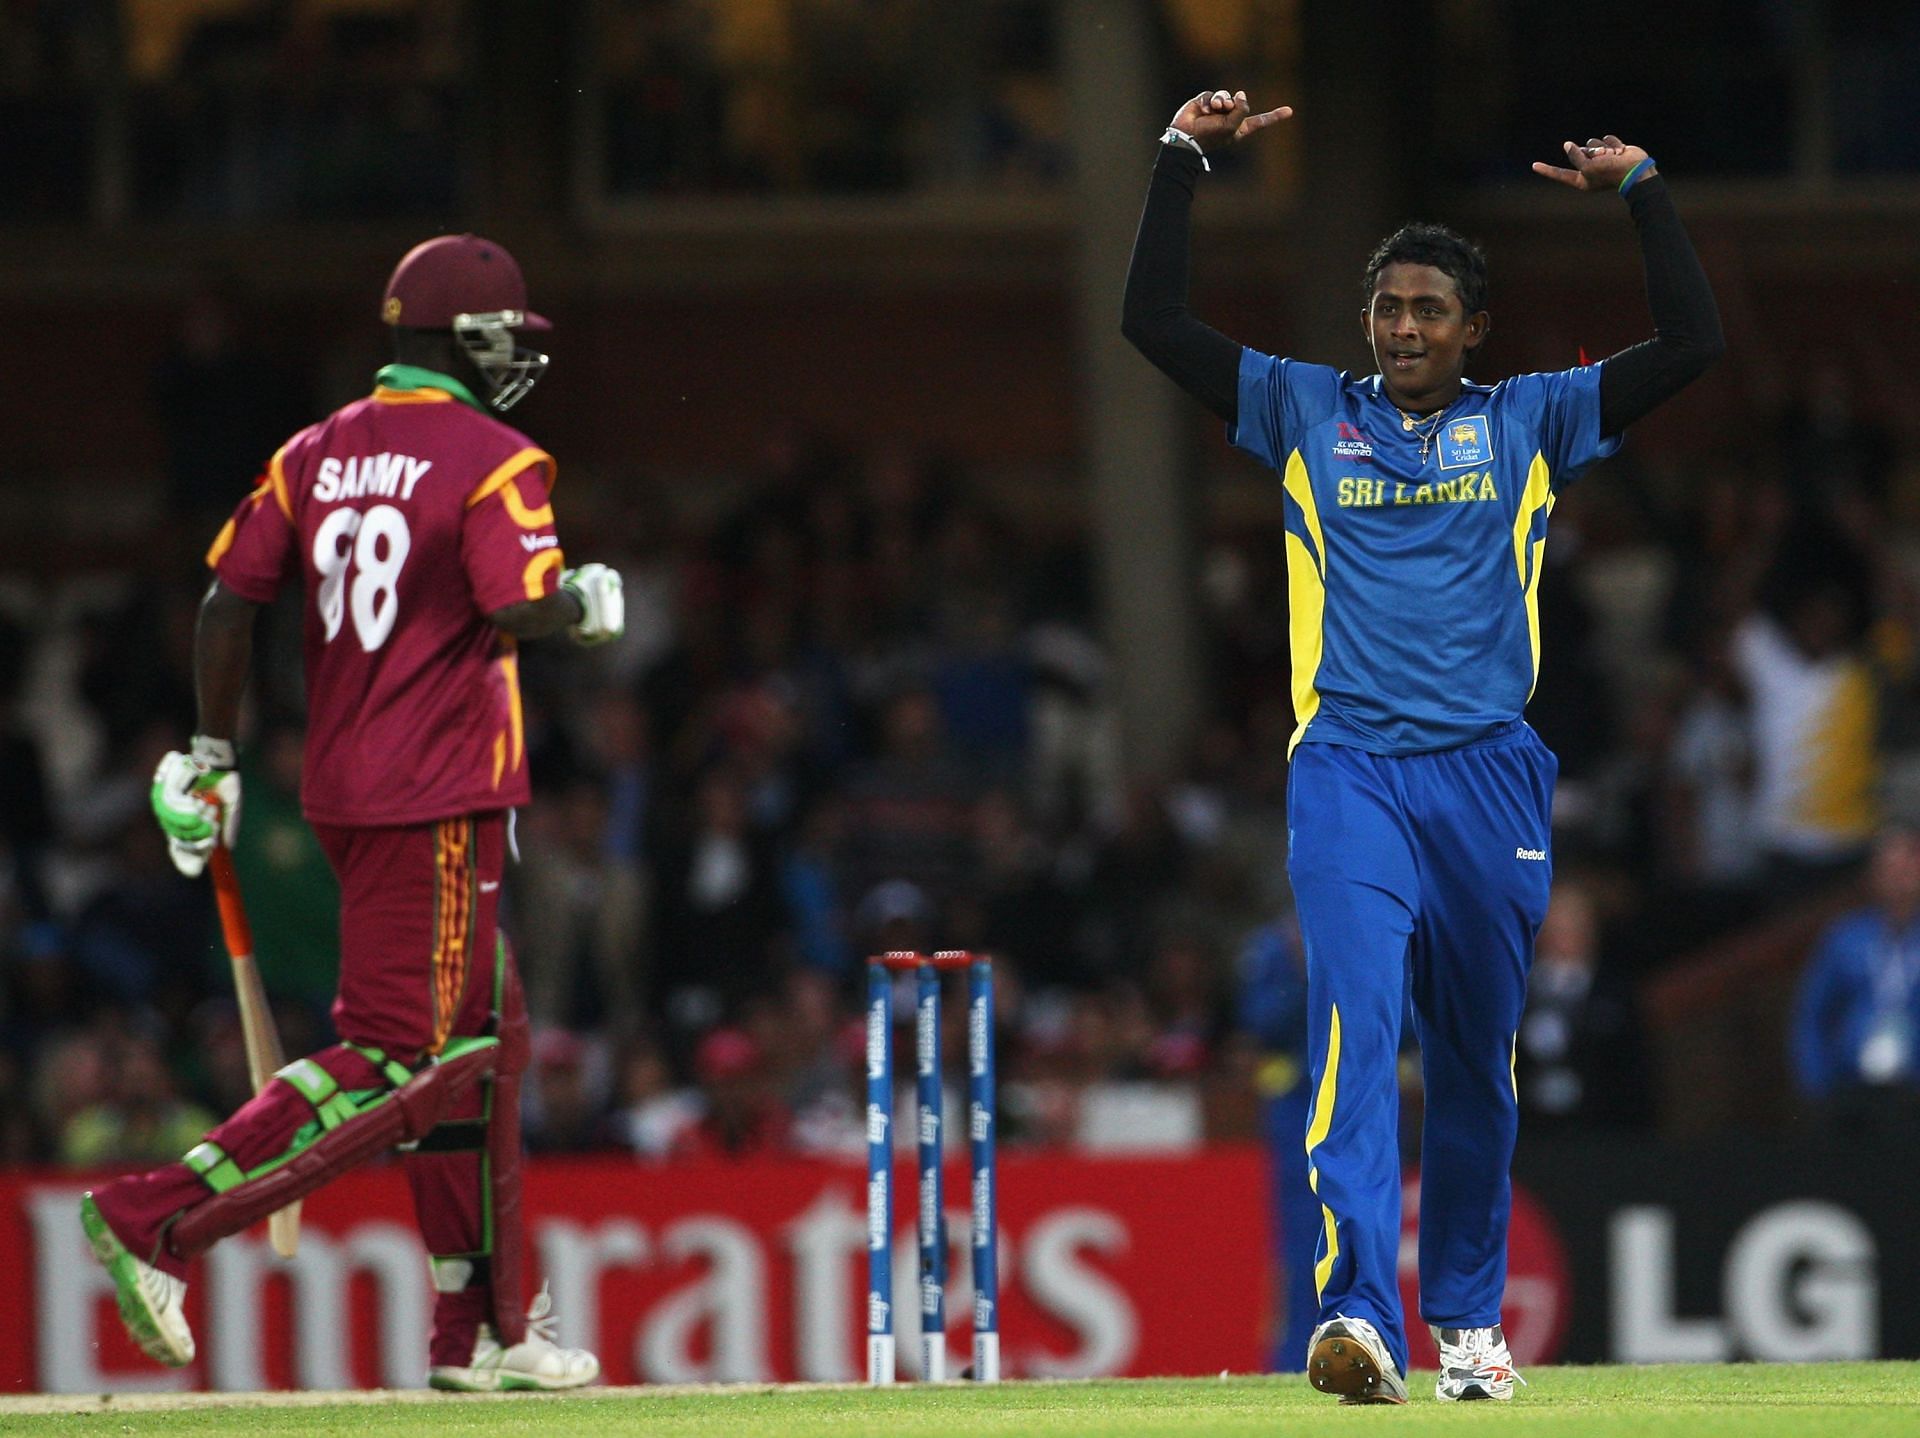 Ajantha Mendis was one of the finest Sri Lankan spinners ever.